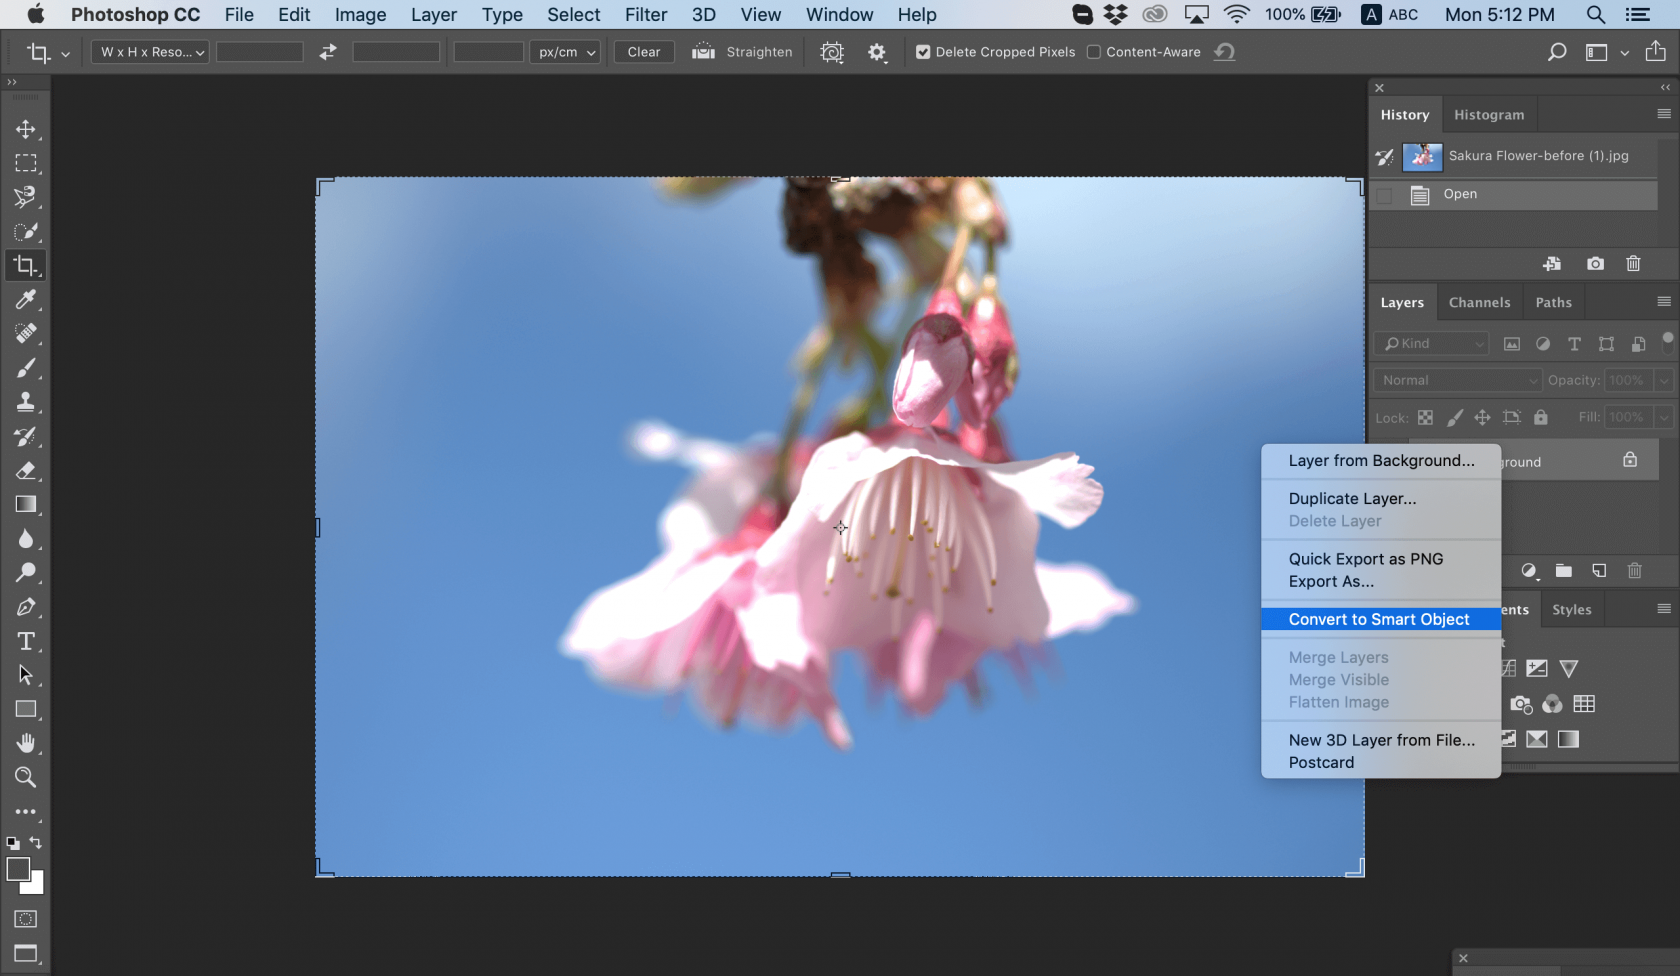 How to Make Image Sharp in Photoshop